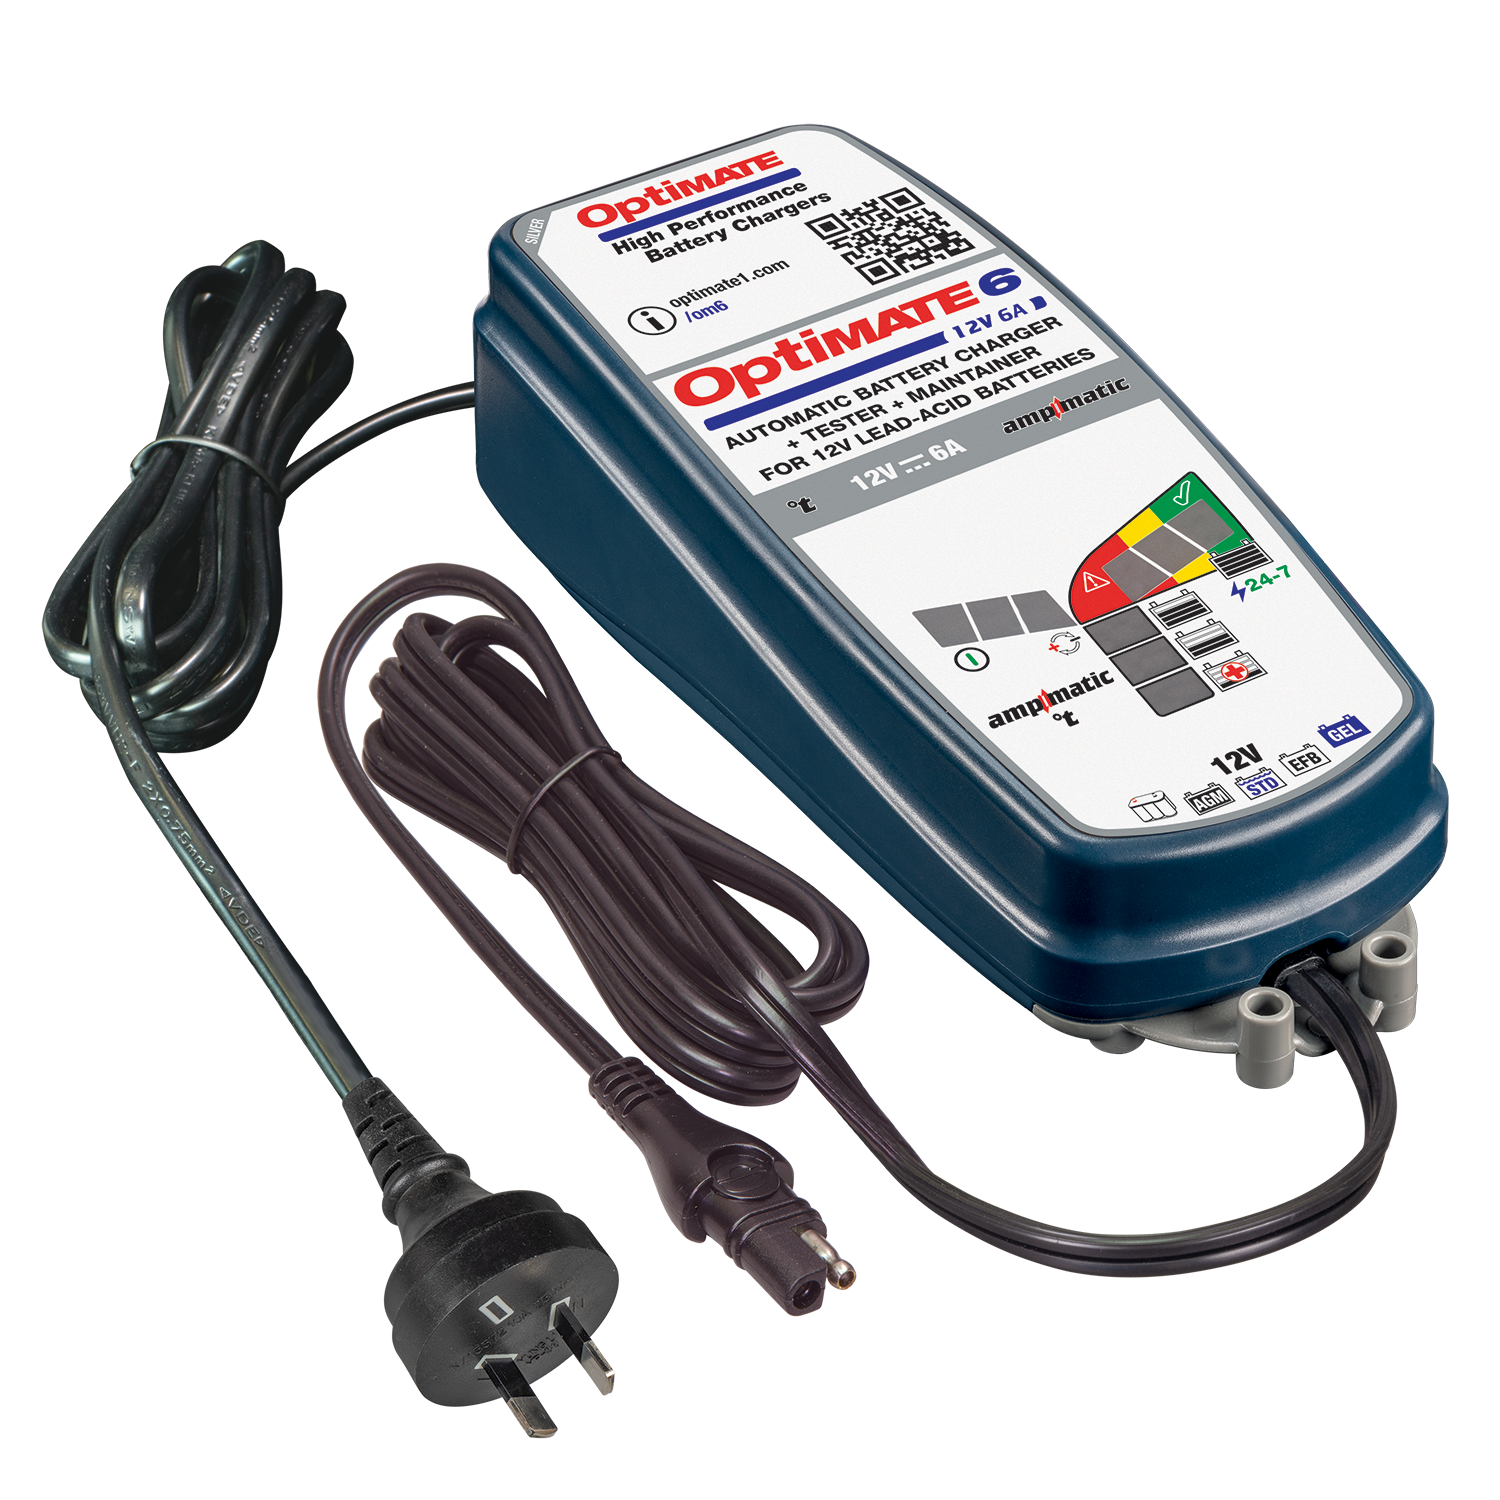 OptiMate 6 ampmatic 12V automatic battery charger car bike motorhome boat